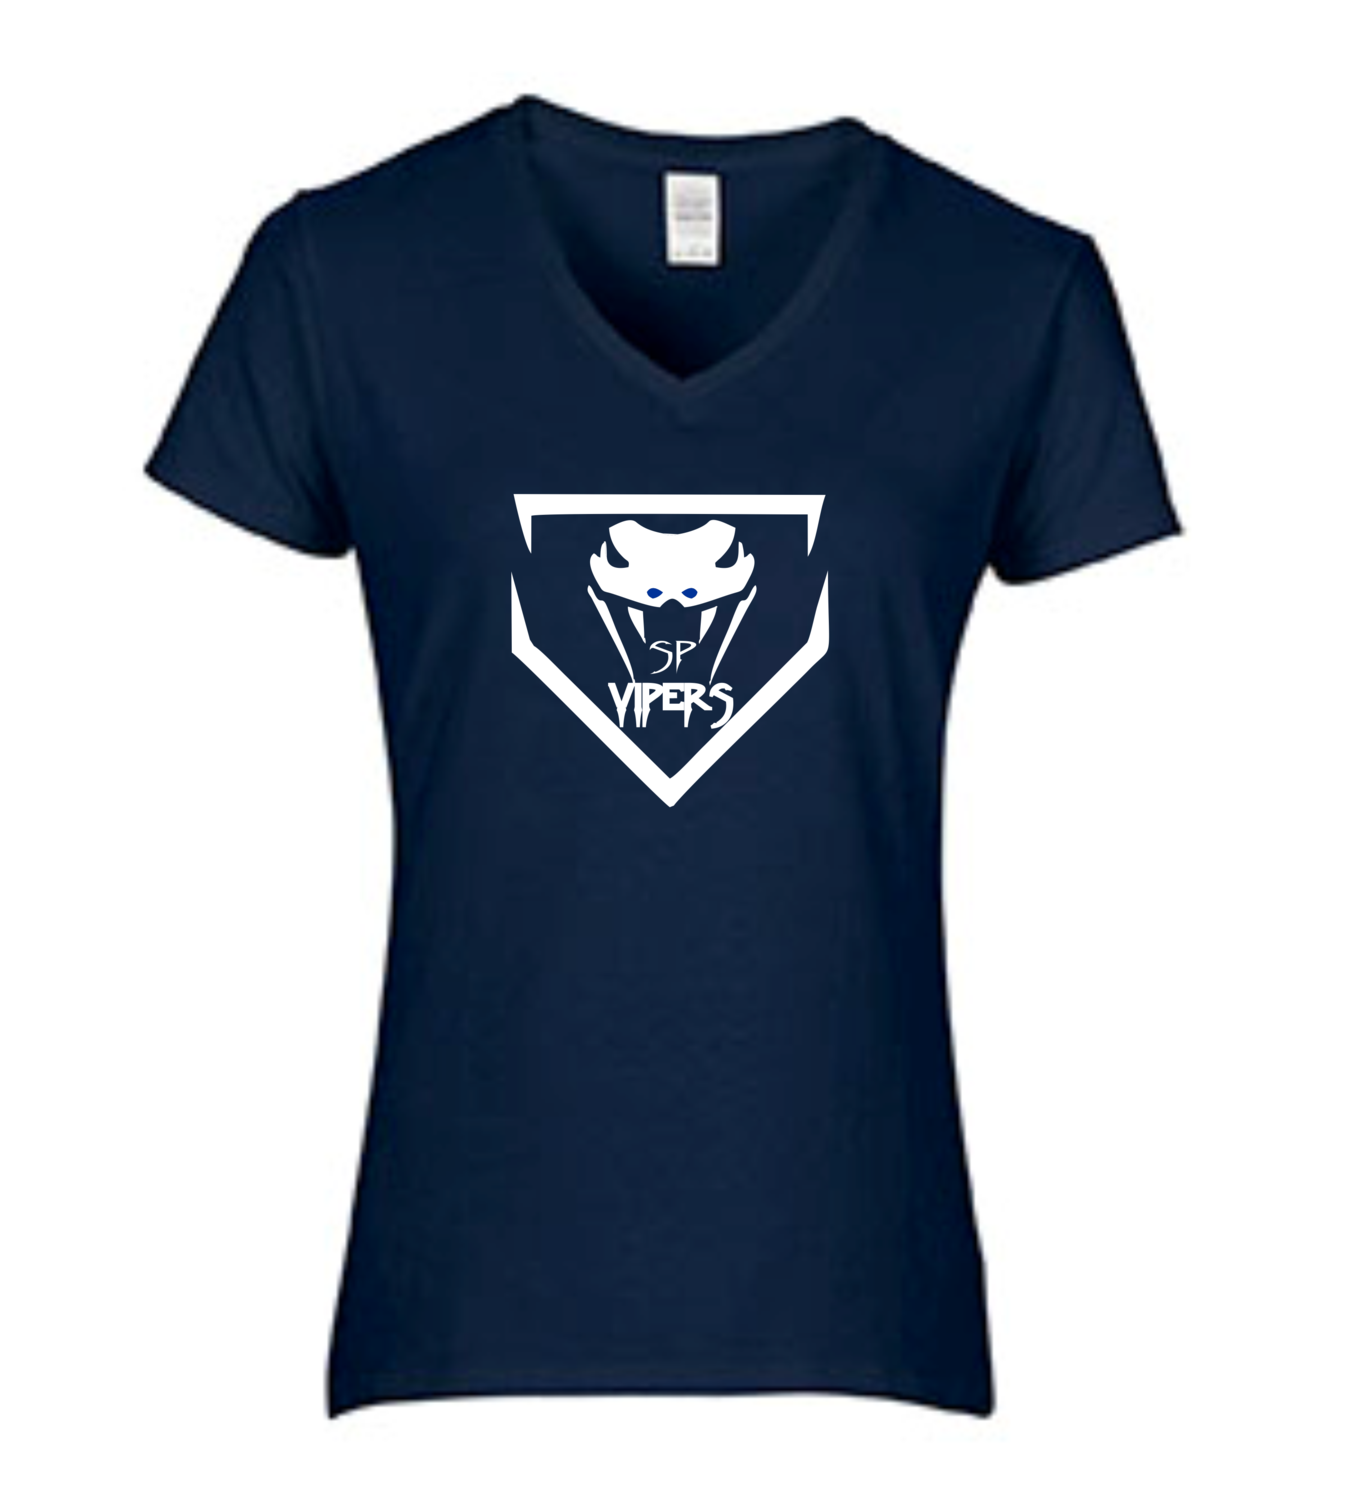 Women's V-Neck Short Sleeve Performance T-Shirt - Available in 2 colors